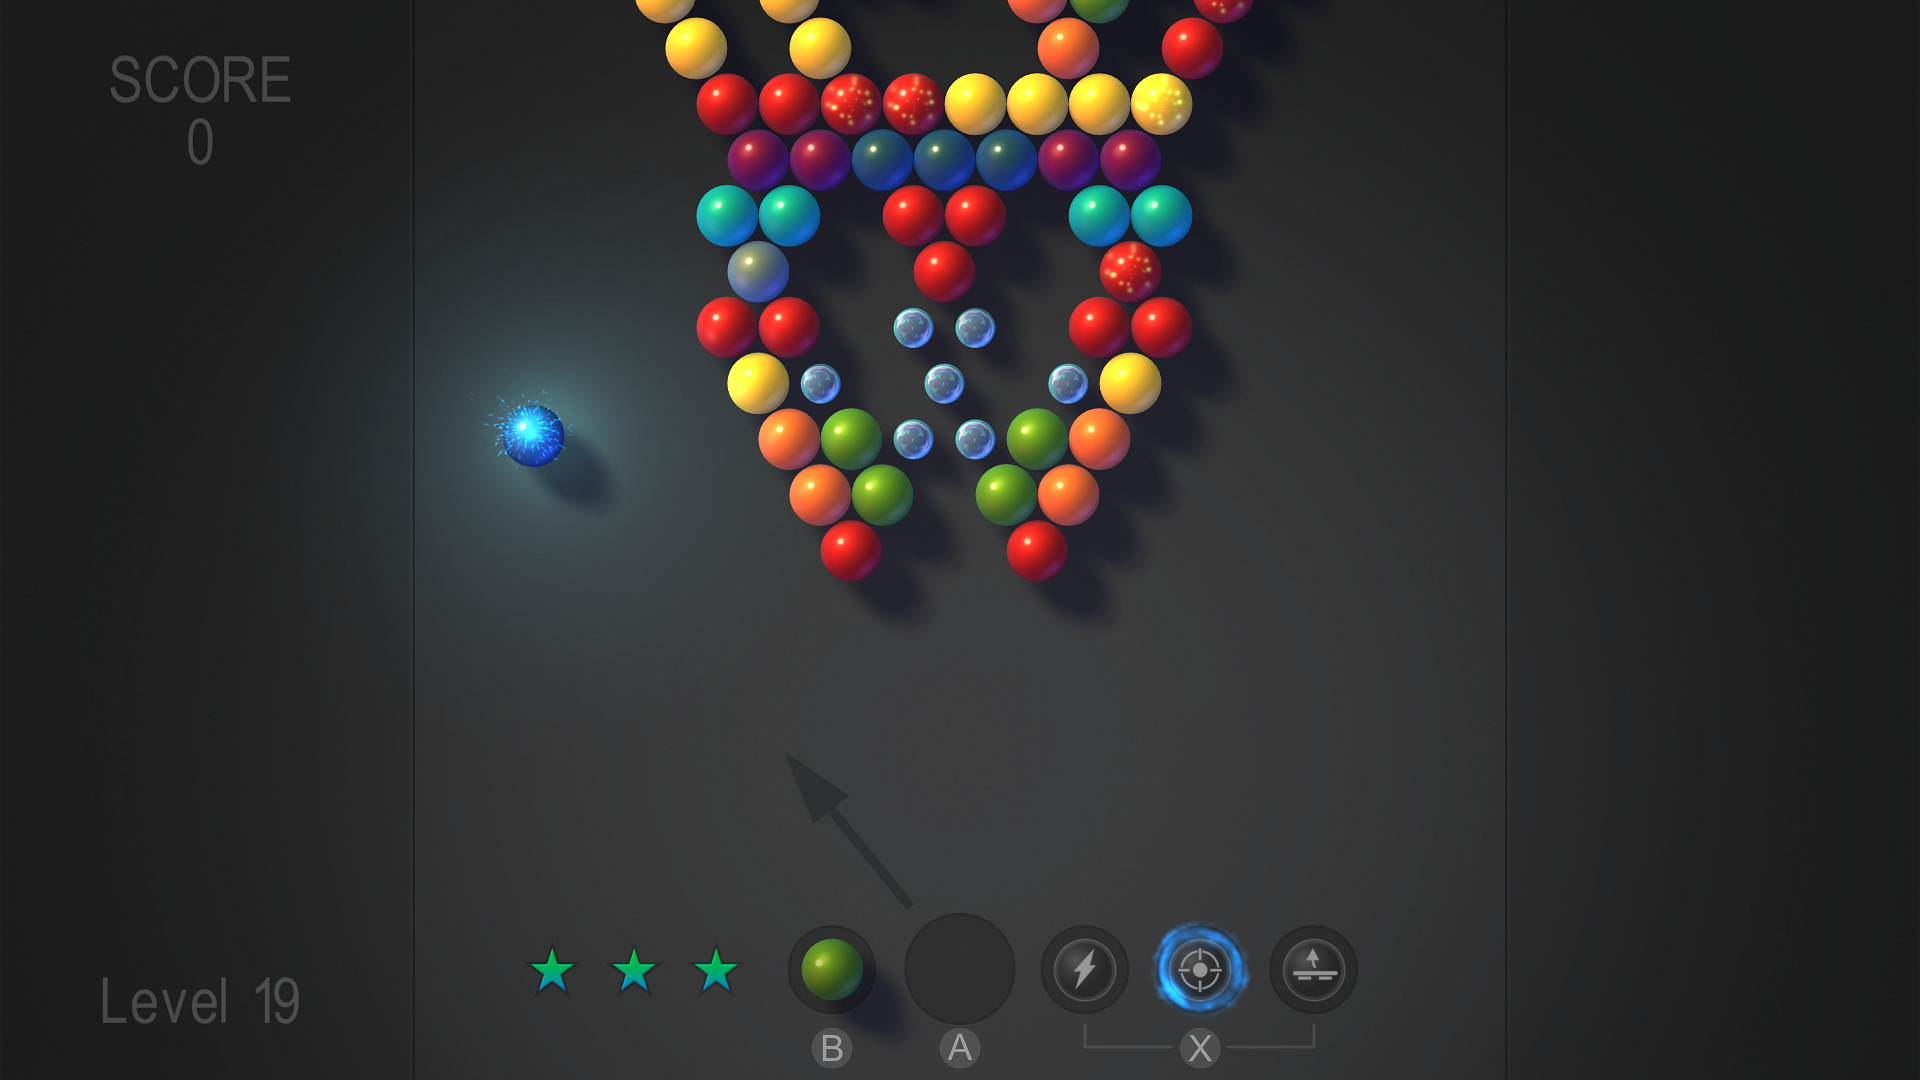 Bubble Shooter 2 for PC - Free Download & Install on Windows PC, Mac